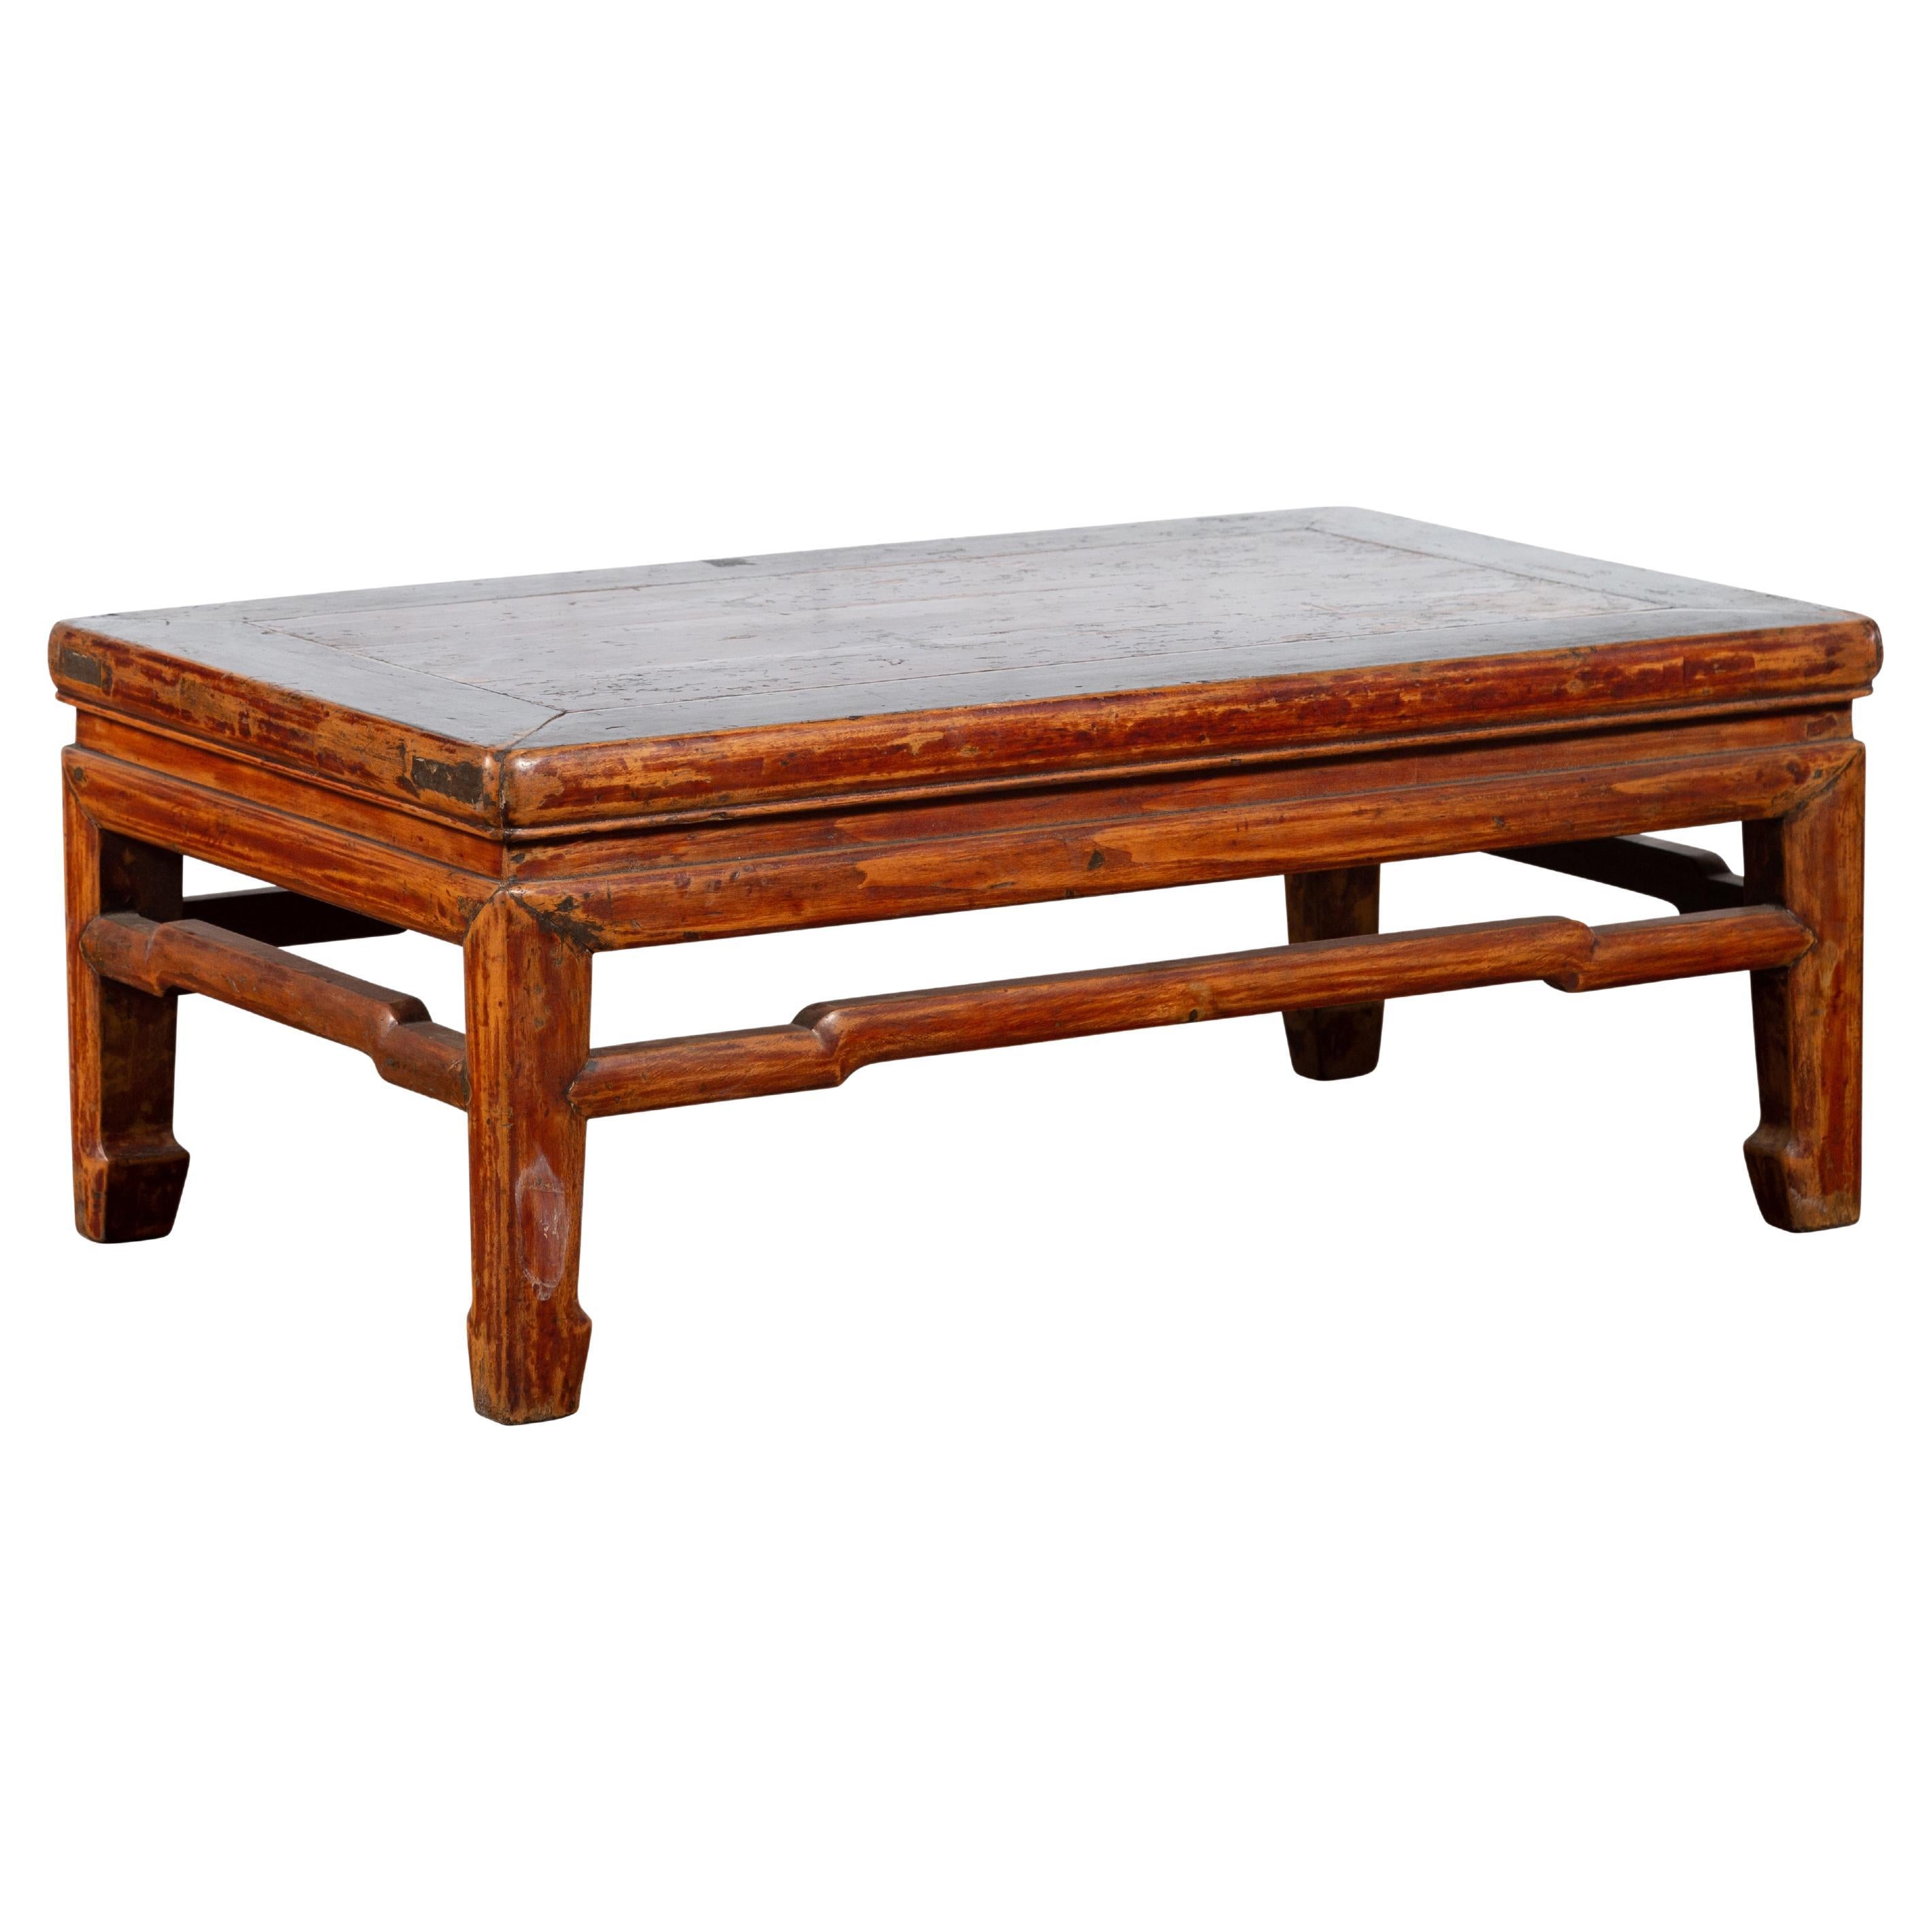 Qing Dynasty 19th Century Low Distressed Side Table with Humpback Stretchers